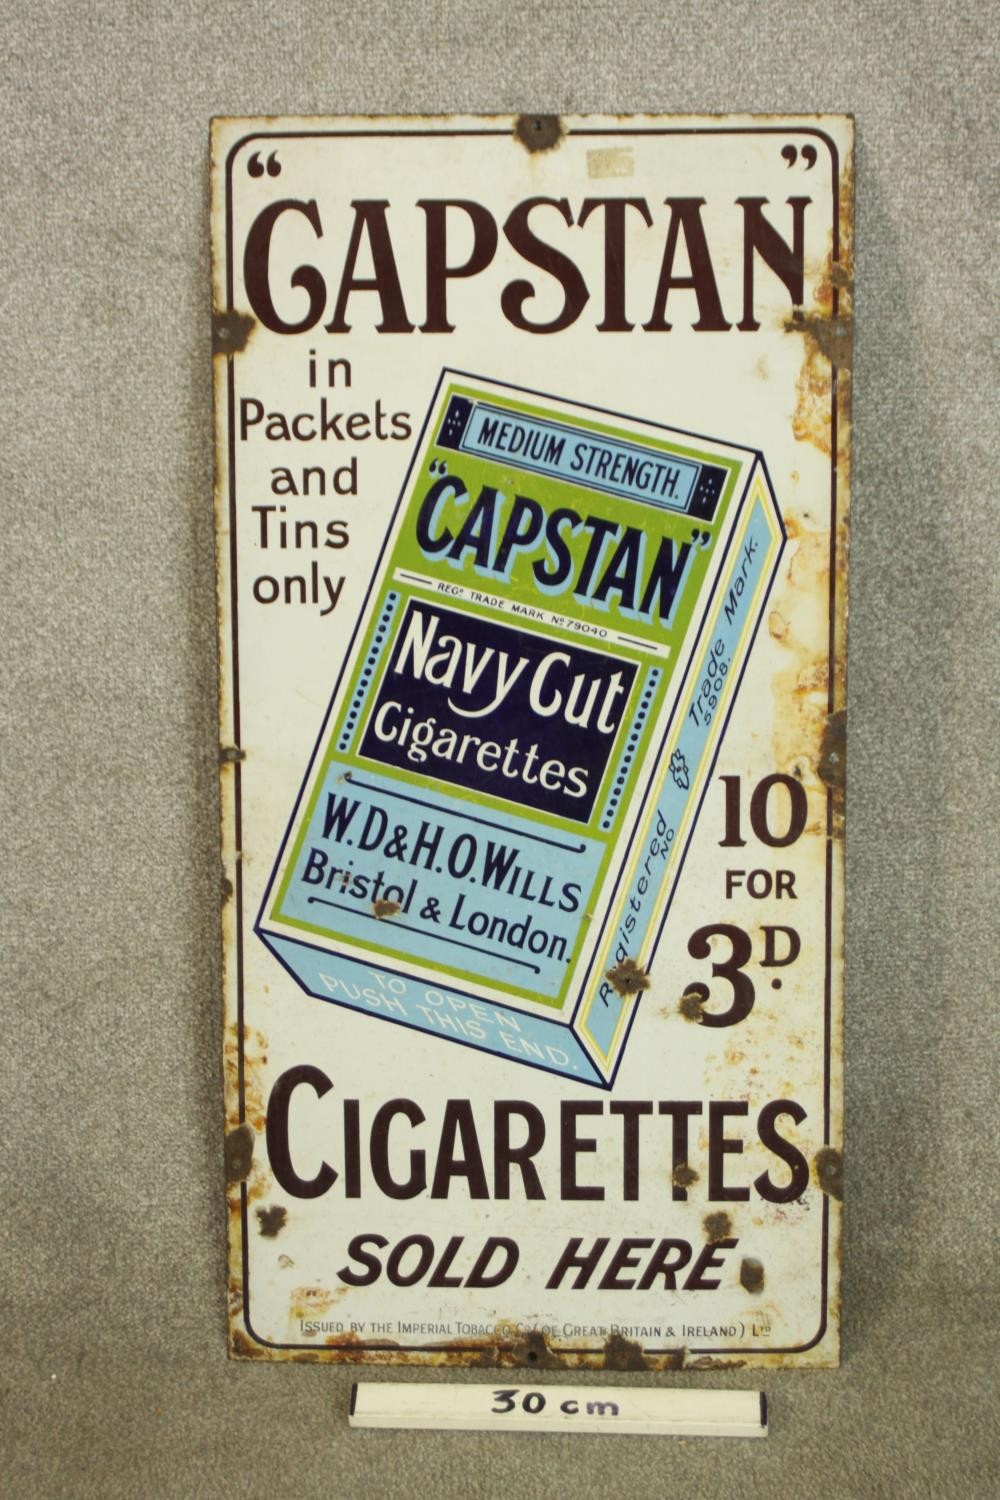 Capstan Cigarettes. Enamelled cigarette advertising sign on metal. 'Capstan In Packets and Tin - Image 2 of 3